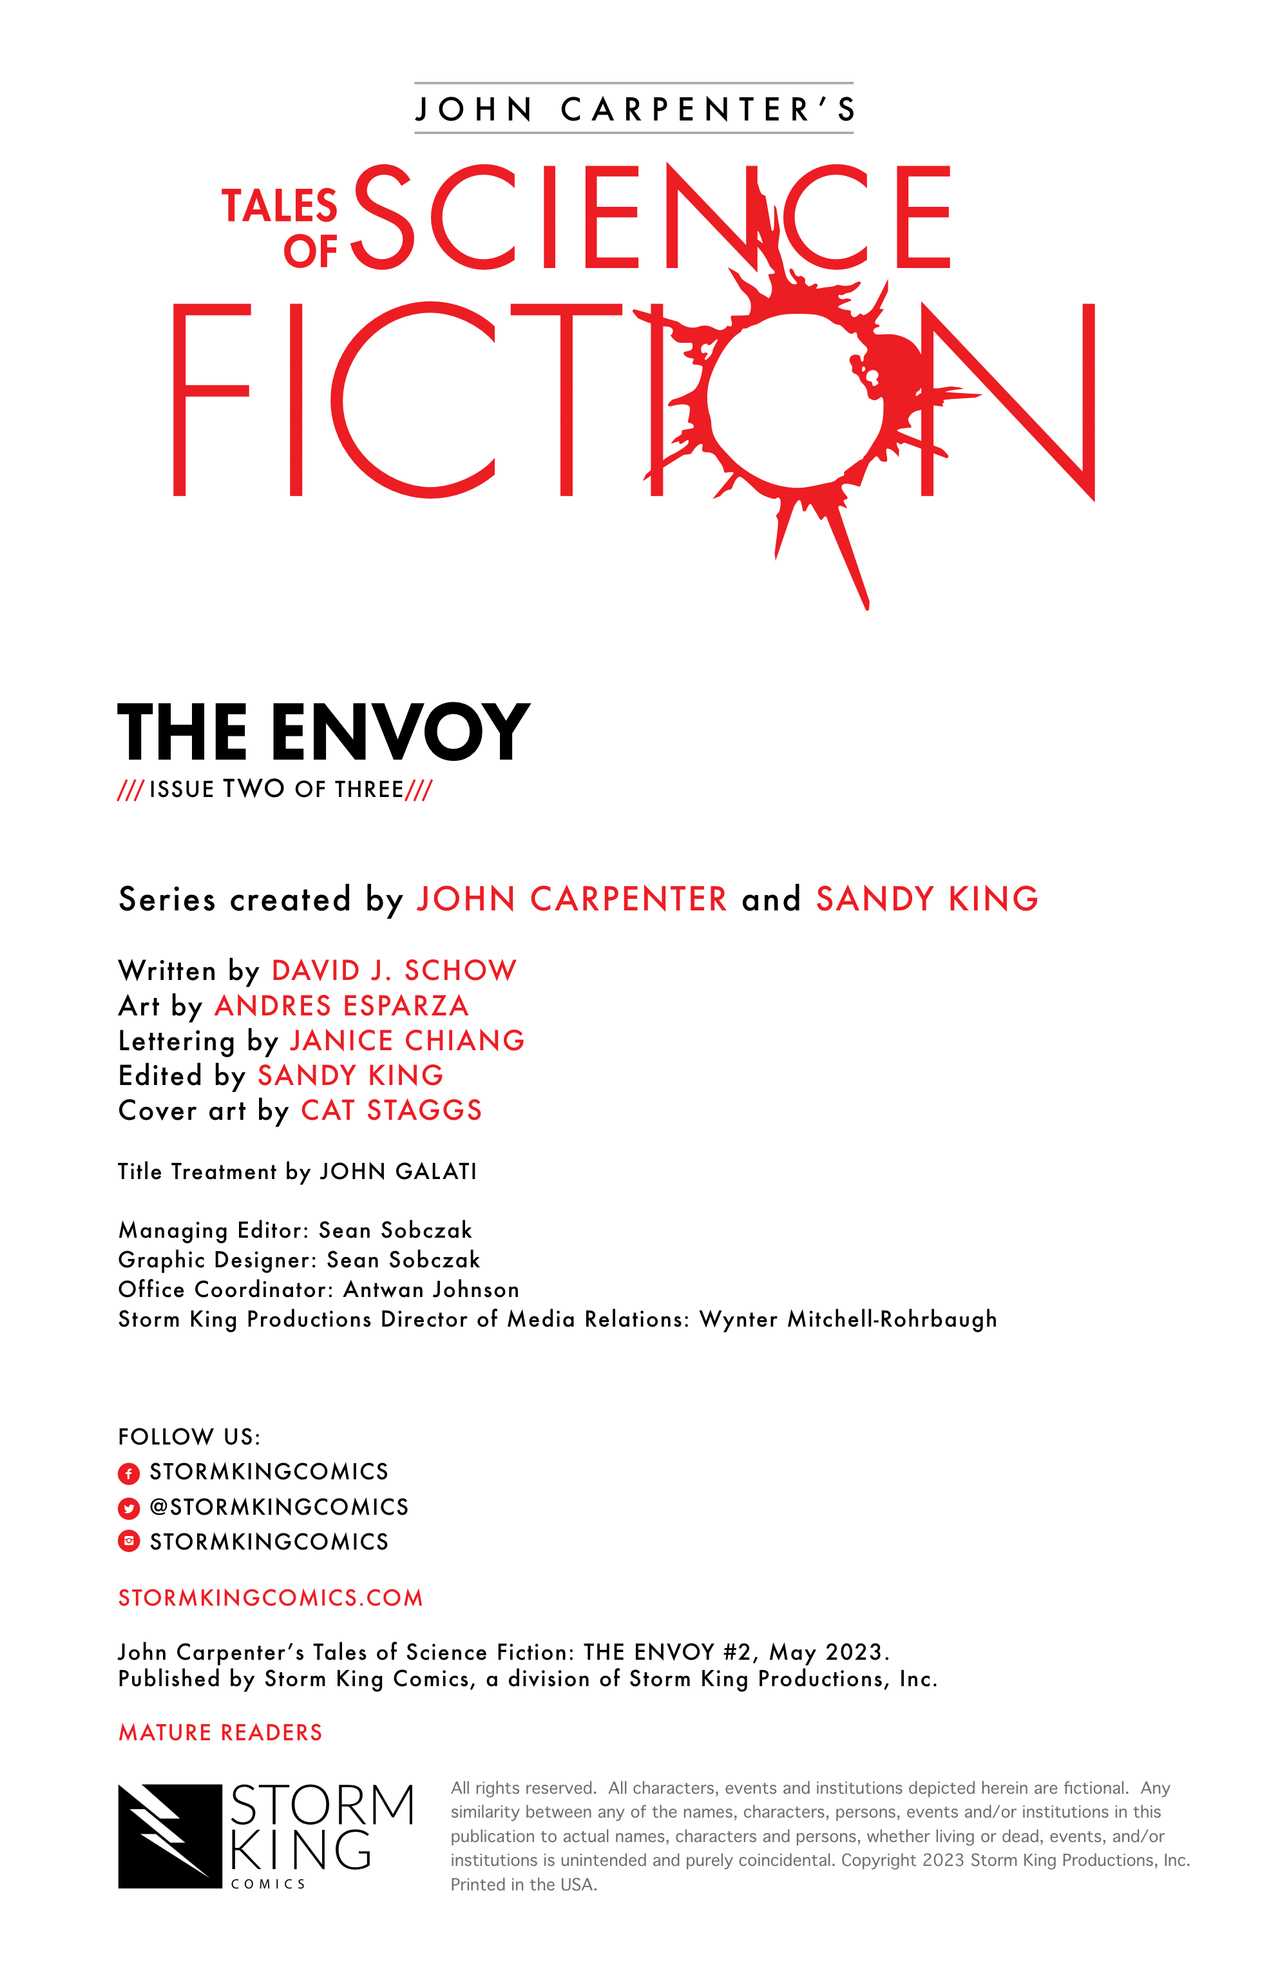 Read online John Carpenter's Tales of Science Fiction: The Envoy comic -  Issue #2 - 2